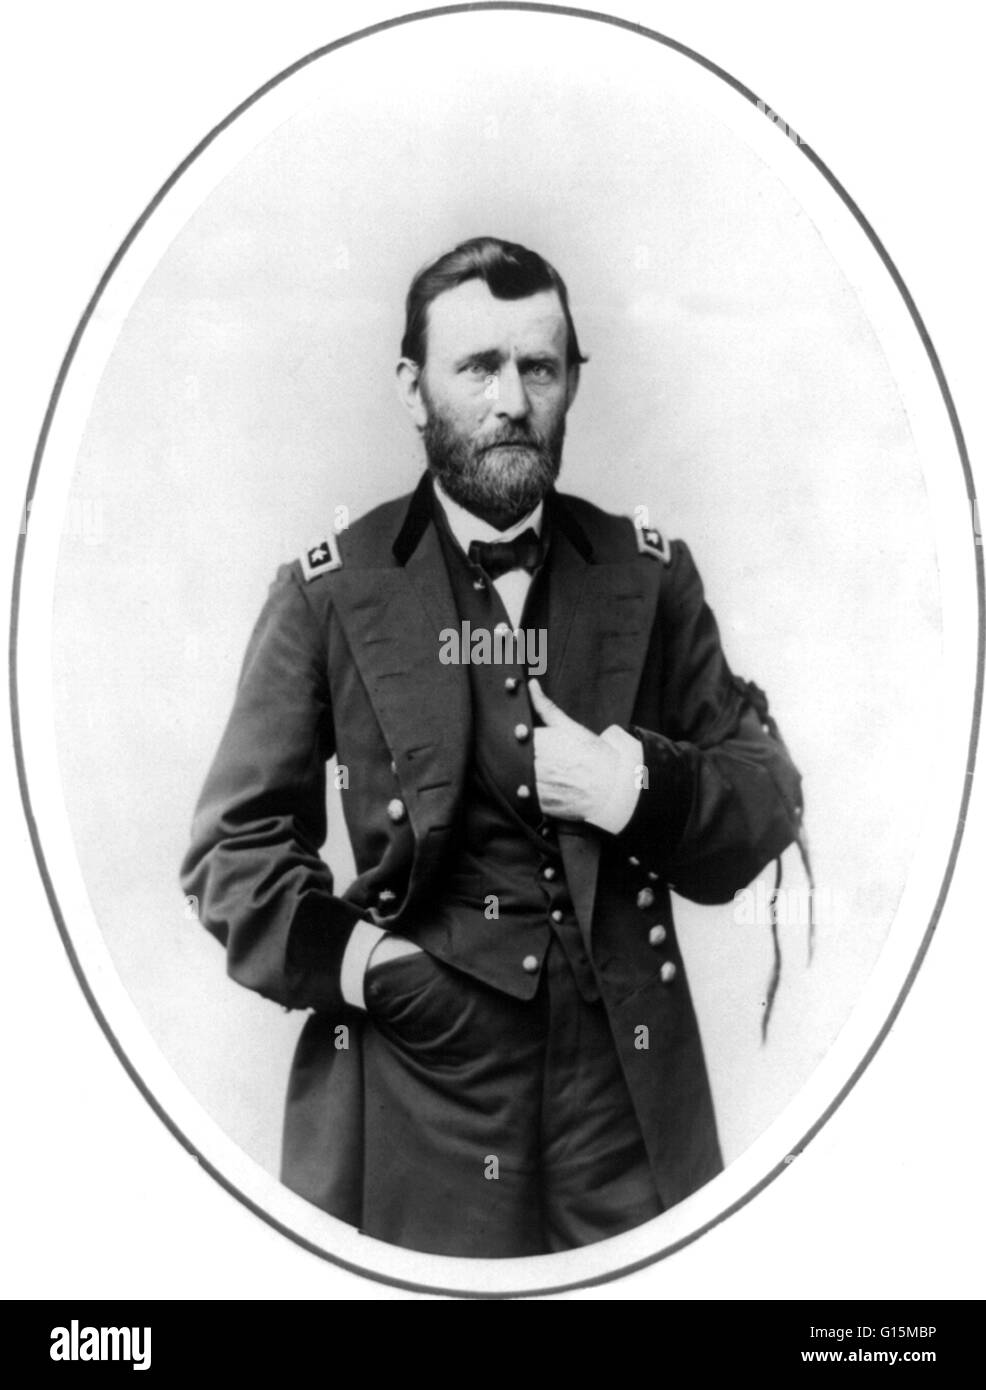 Ulysses S. Grant (born Hiram Ulysses Grant; April 27, 1822 - July 23, 1885) was the 18th President of the United States. A career soldier, he graduated from the United States Military Academy at West Point and served in the Mexican-American War. Under Gra Stock Photo